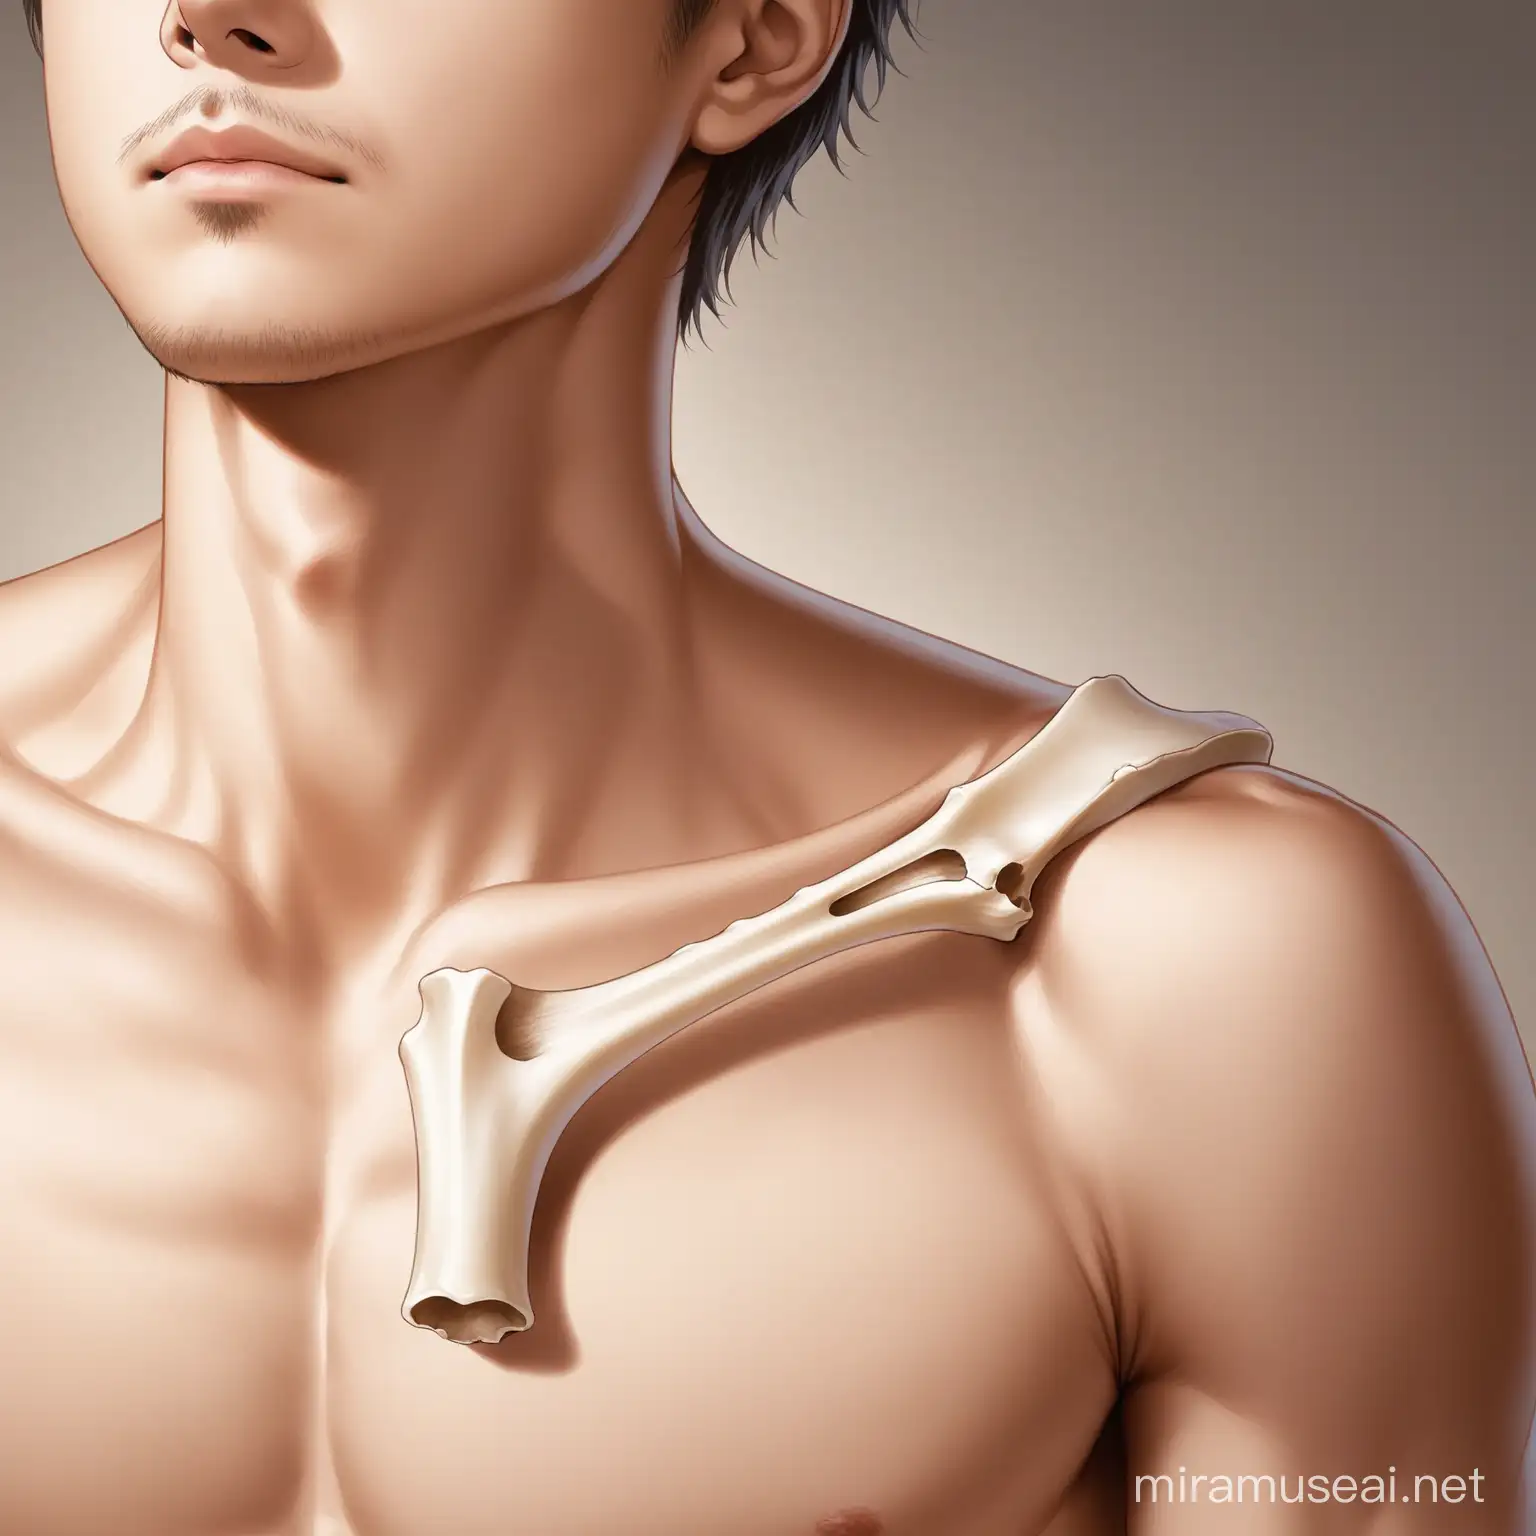 Man Holding Clavicle Bone in Mysterious Setting